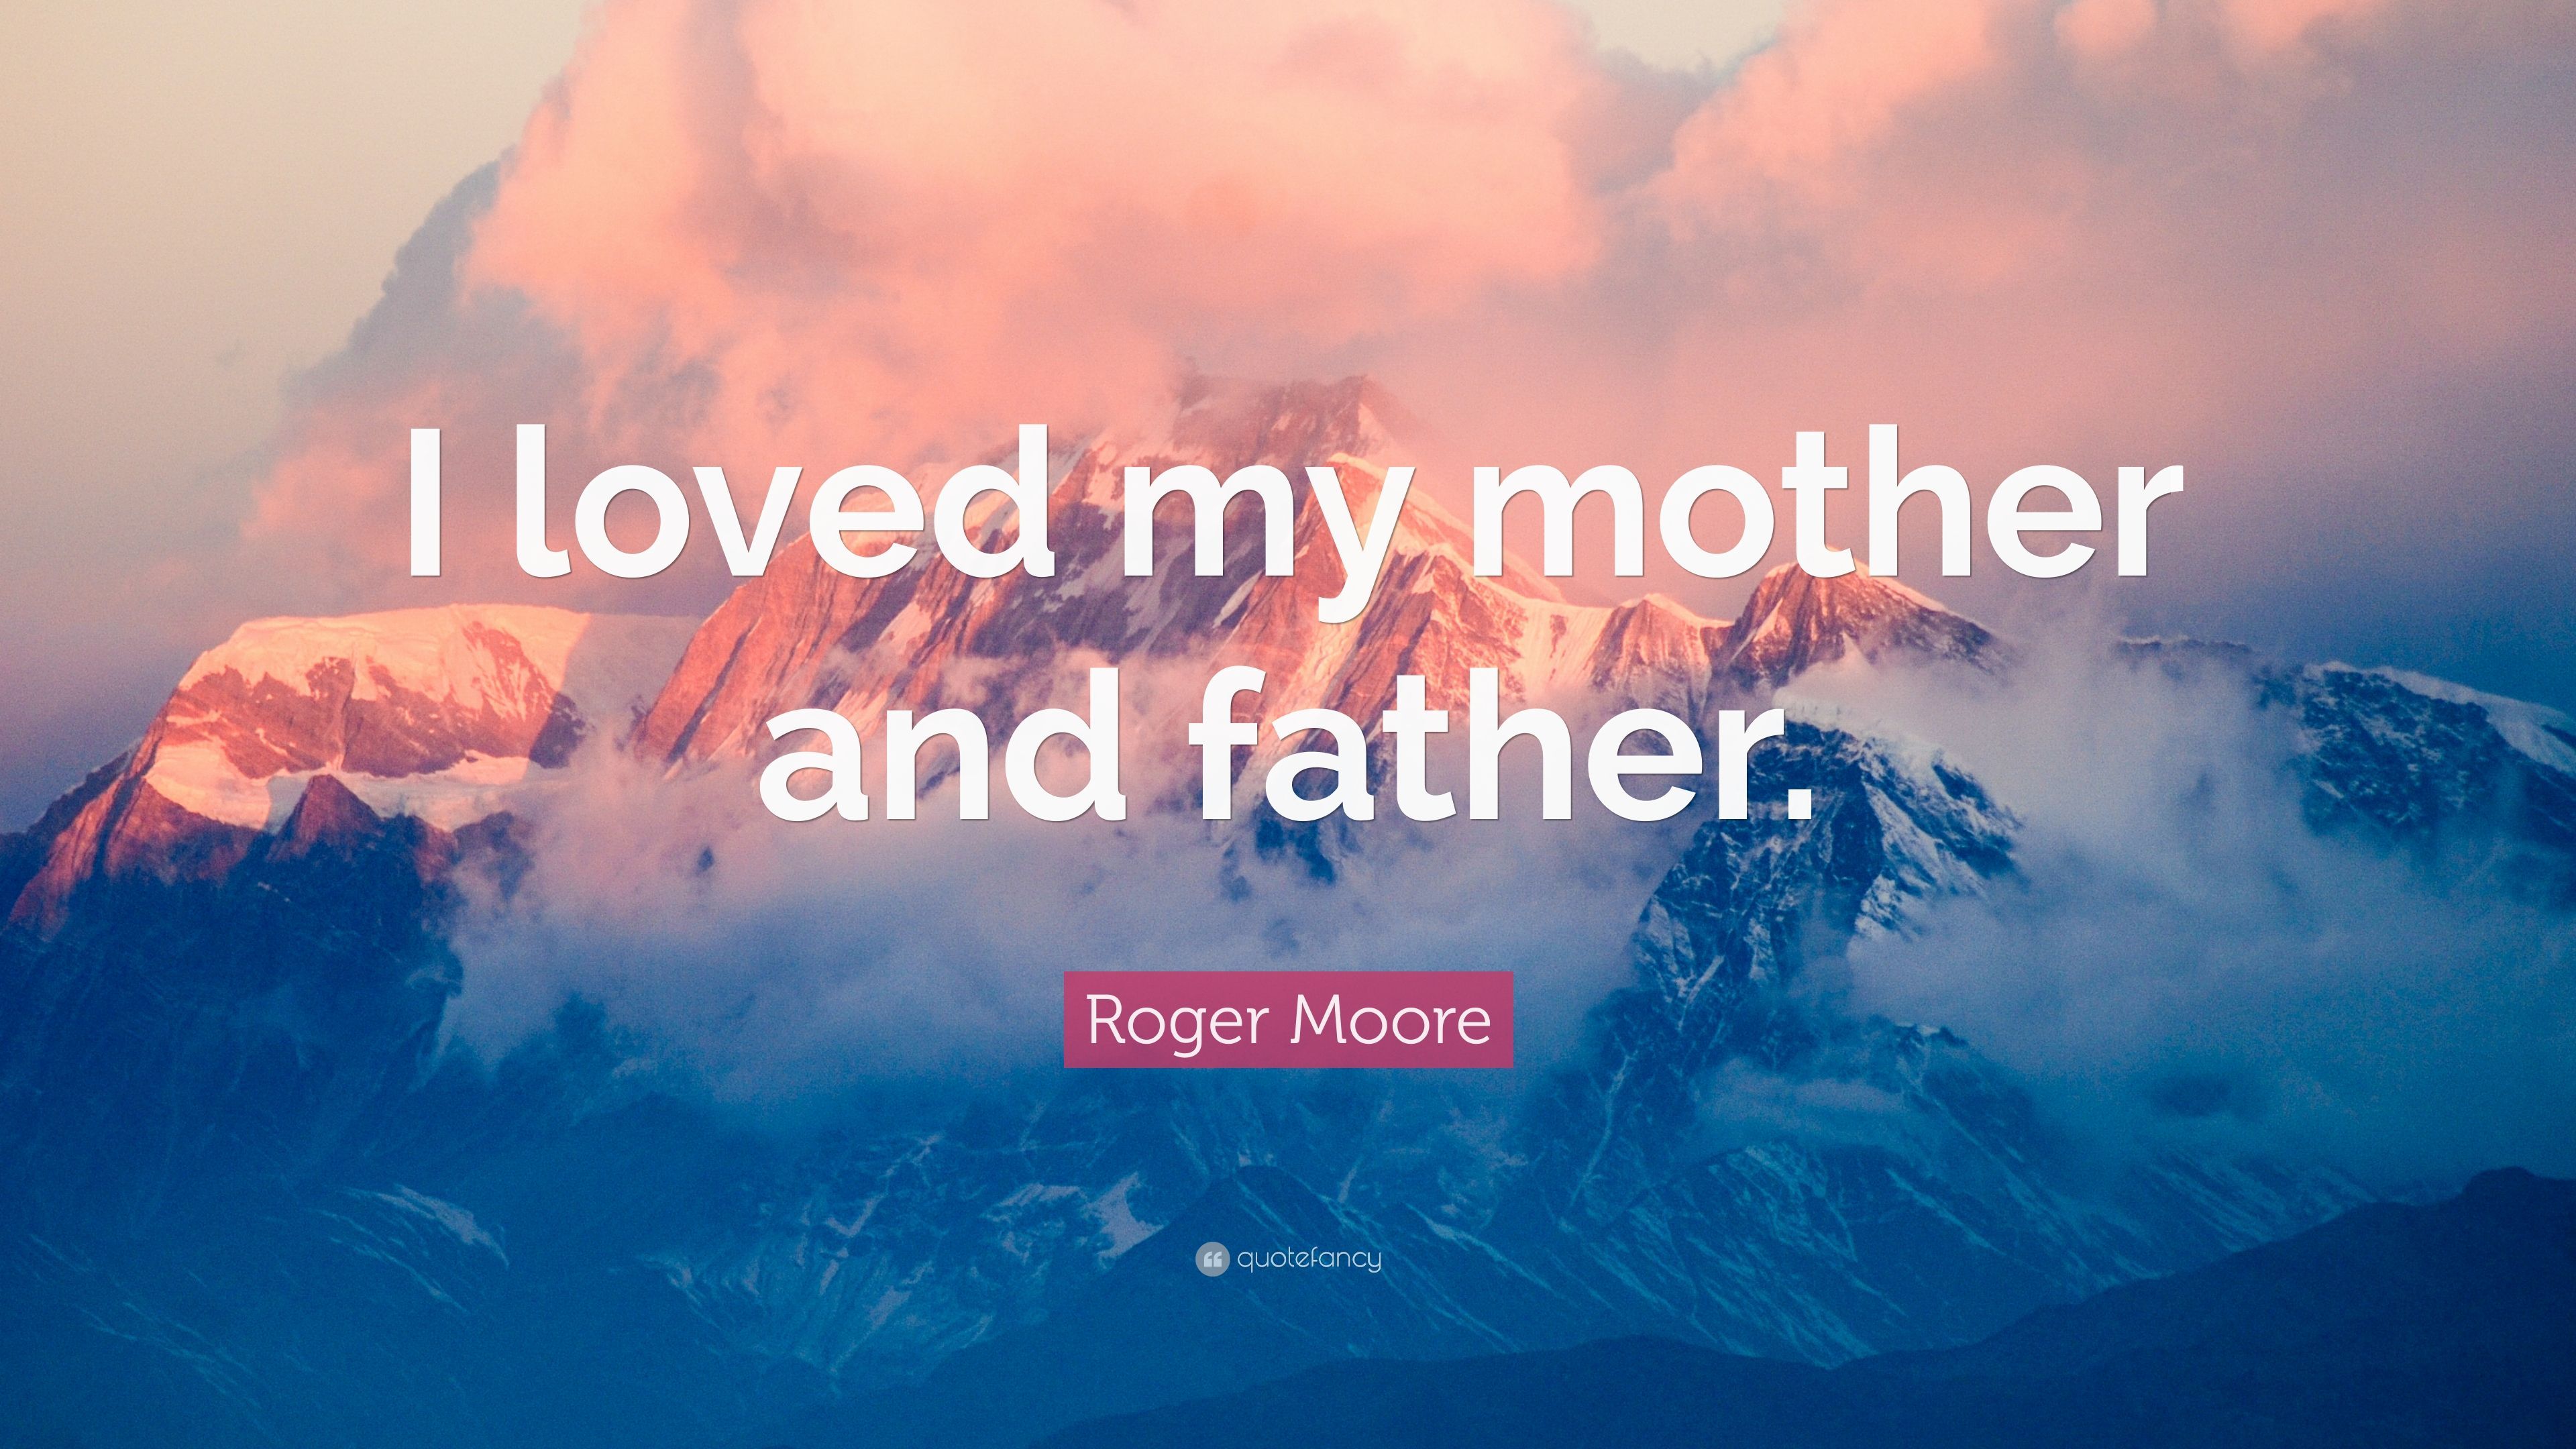 Roger Moore Quote: “I loved my mother .quotefancy.com